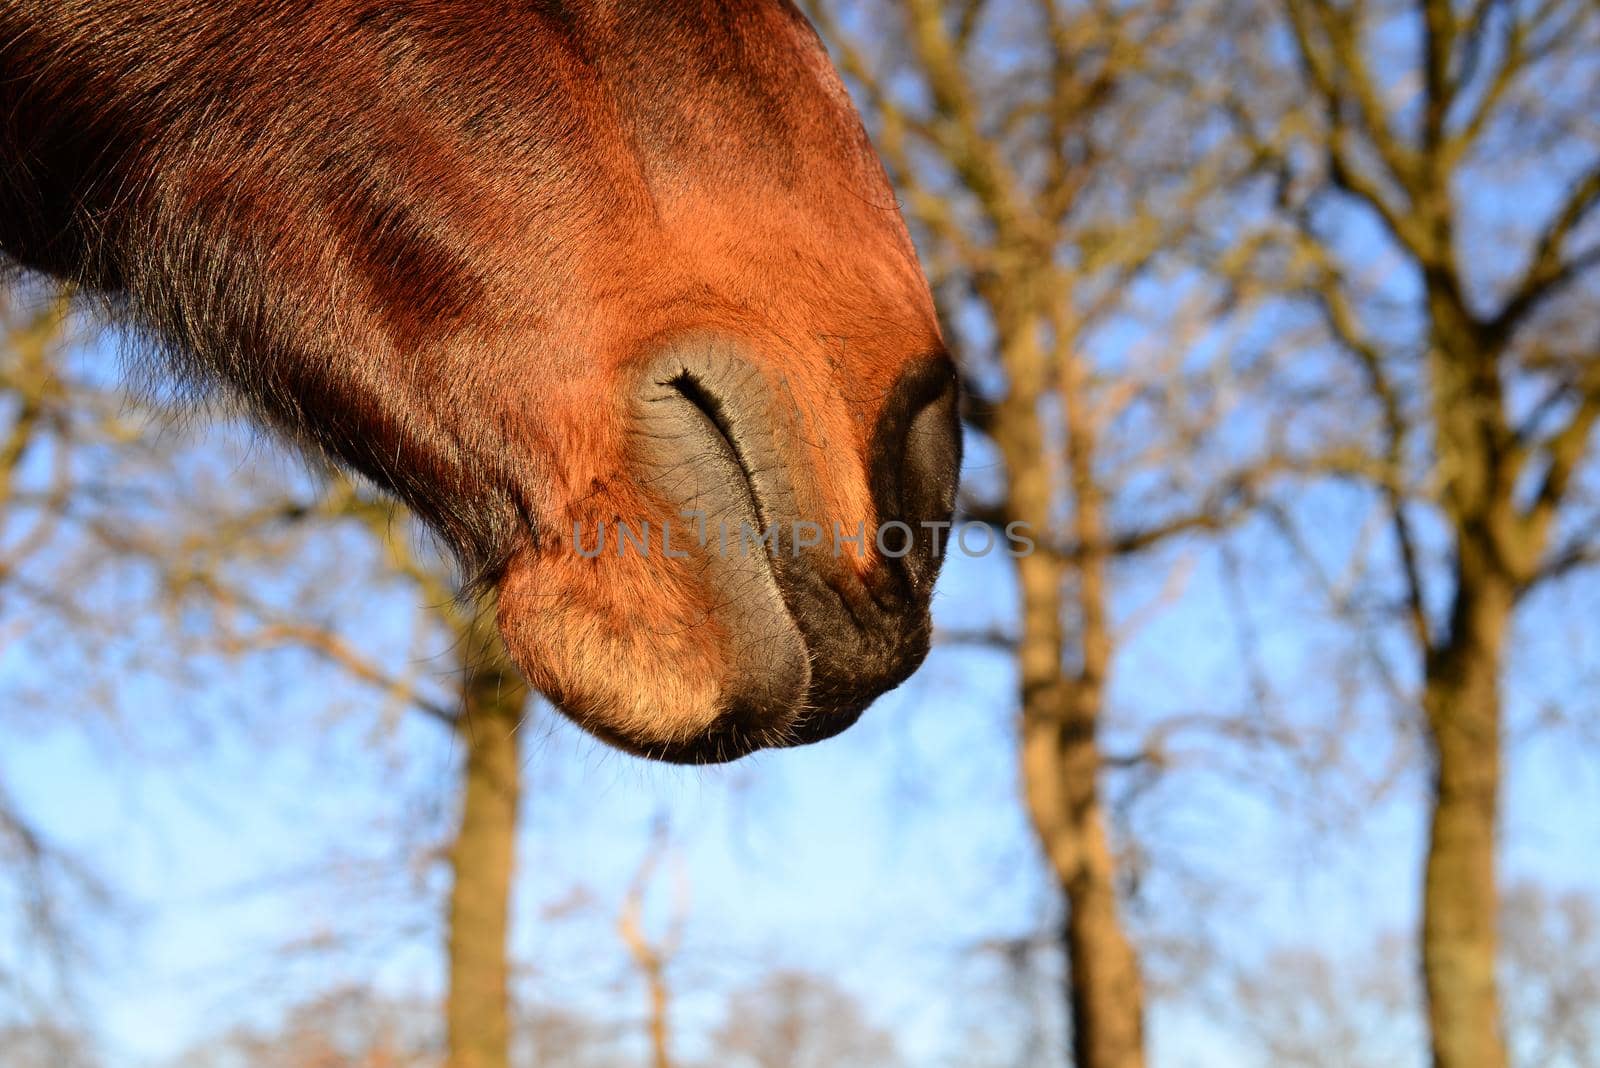 The mouth of a brown horse as a close up by Luise123